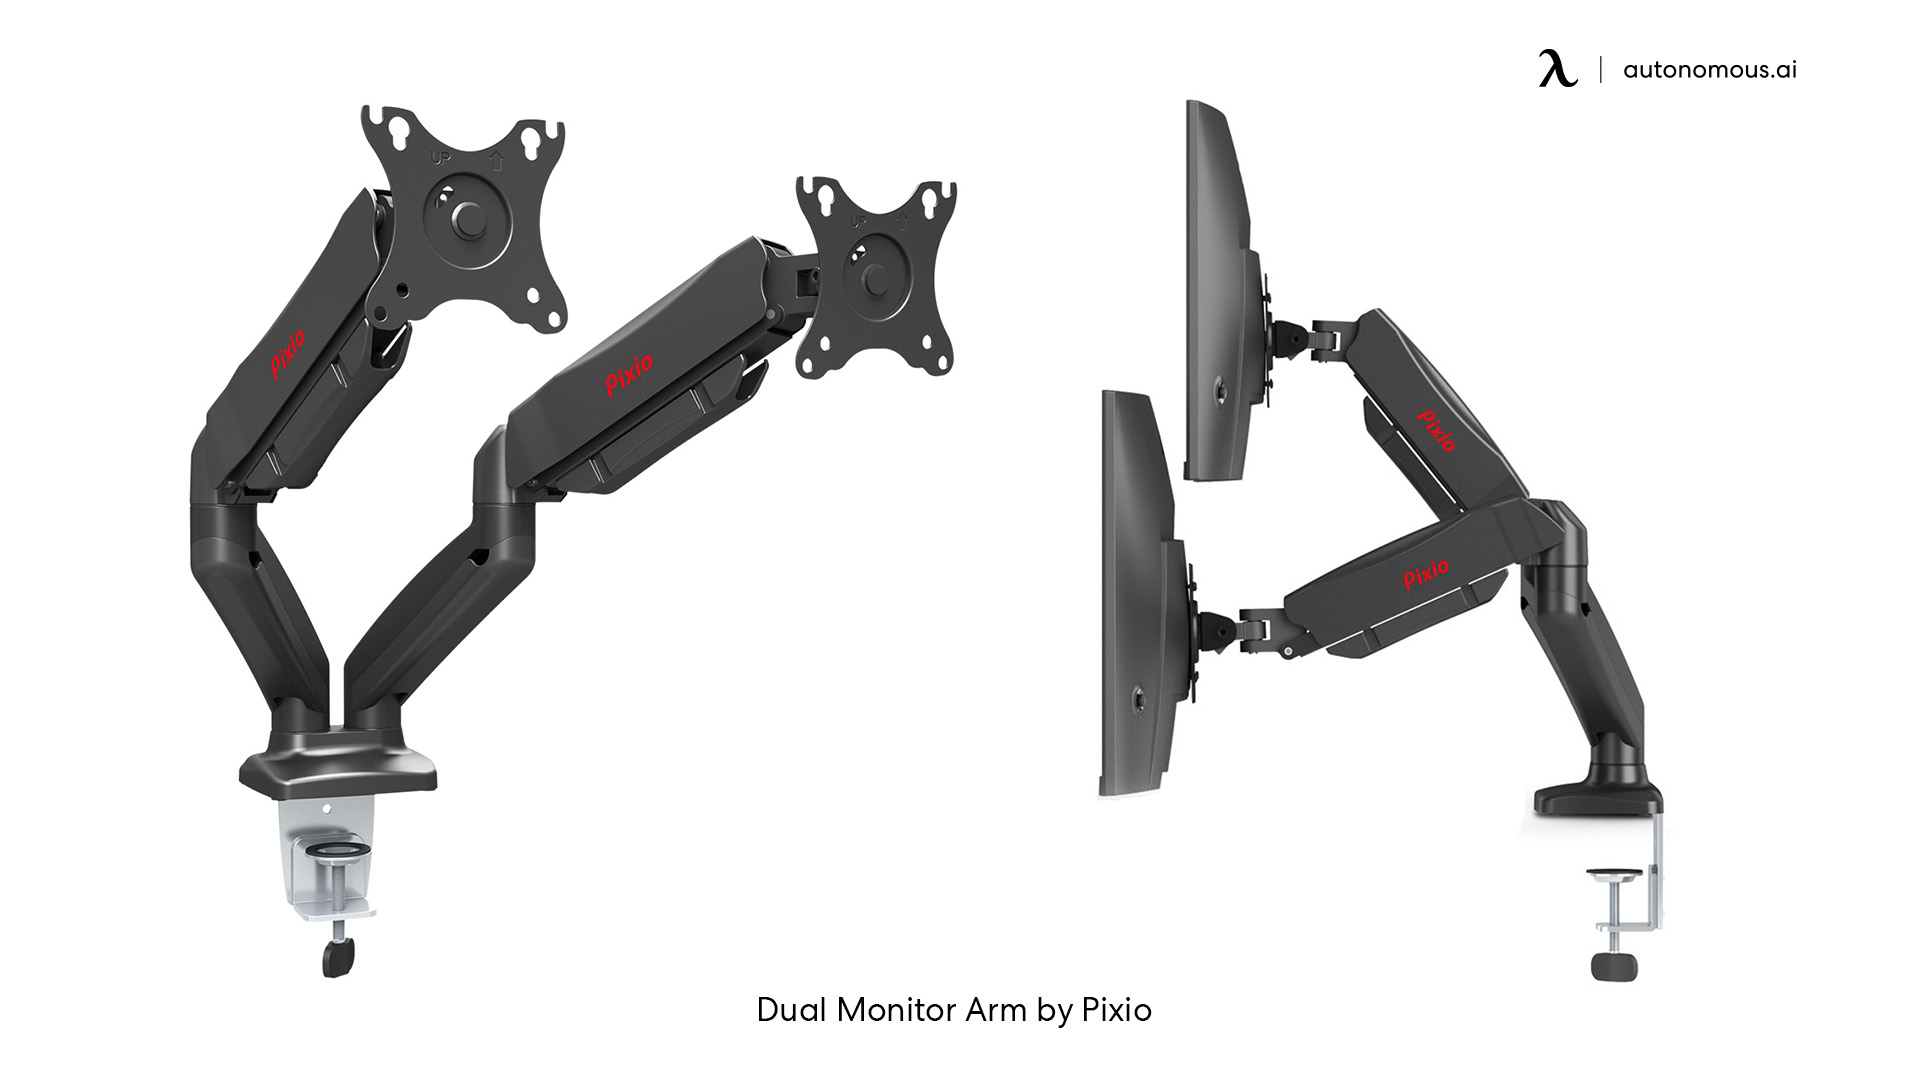 Dual Monitor Arm gaming room accessories